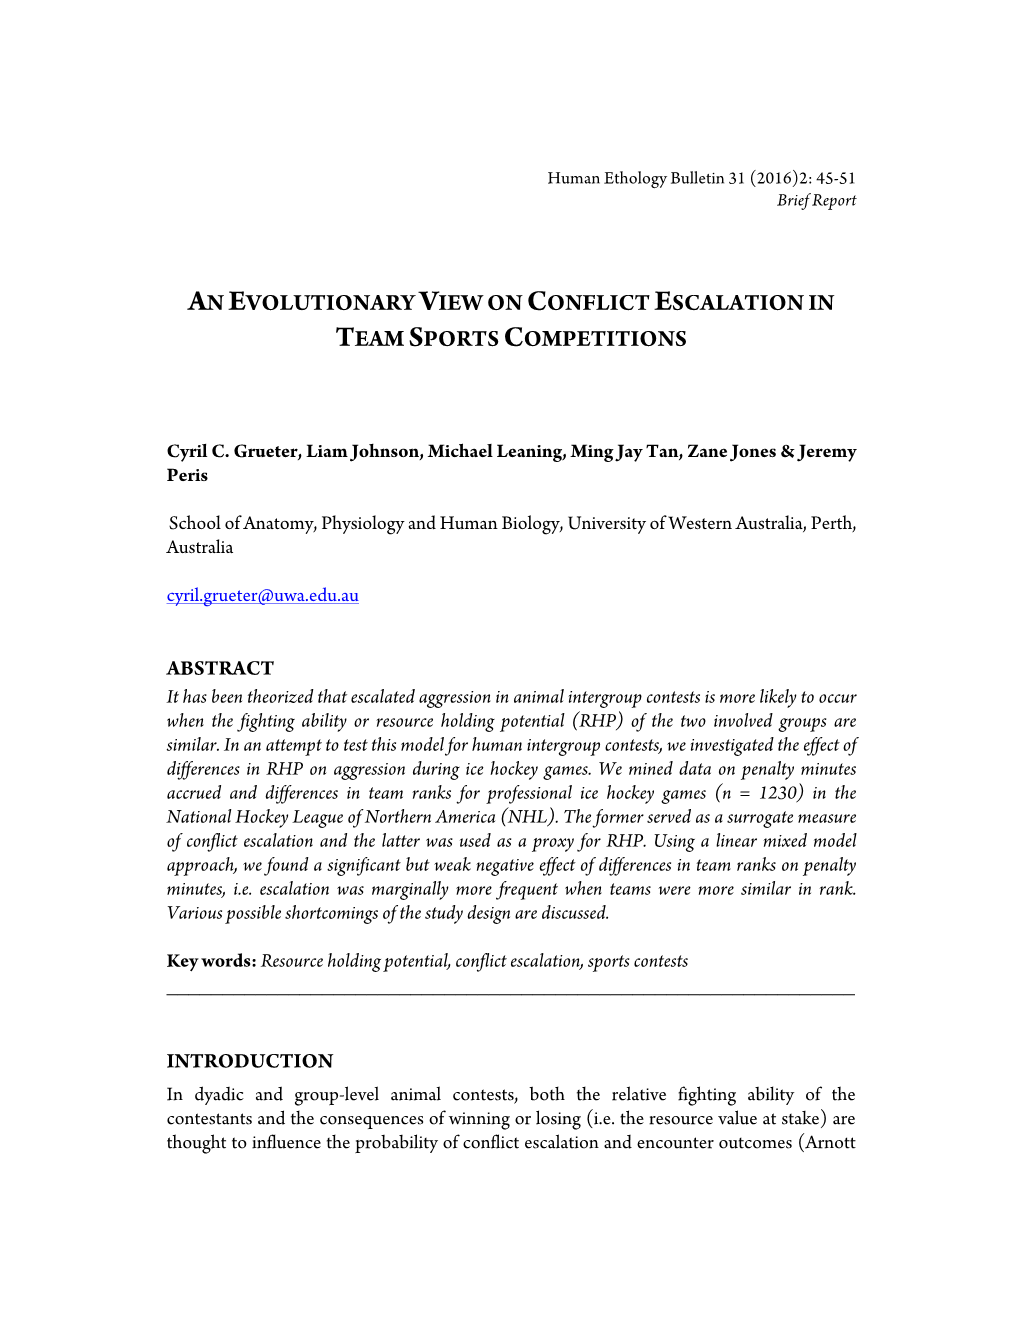 An Evolutionary View on Conflict Escalation in Team Sports Competitions